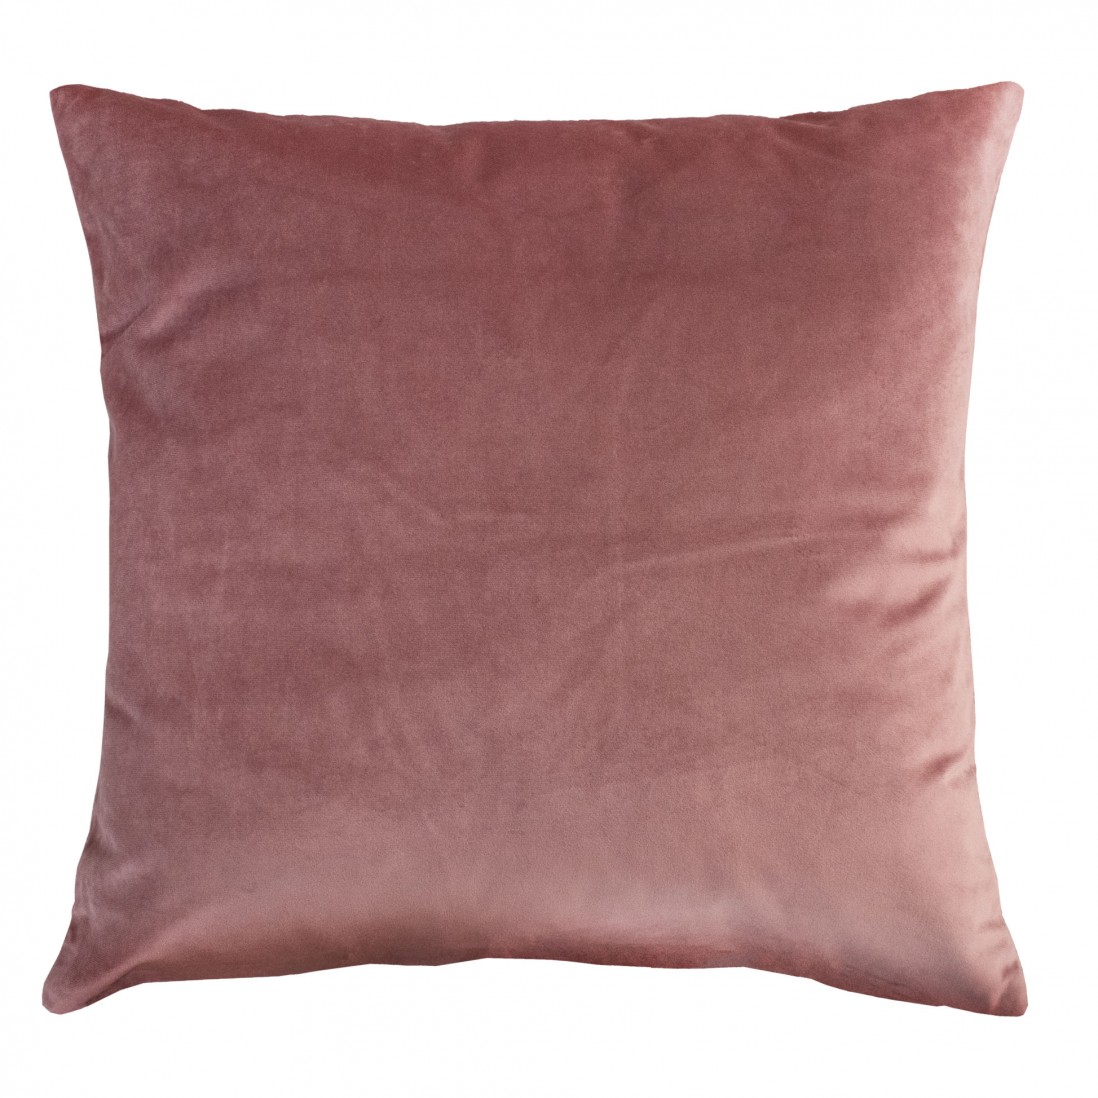 NUDE PINK MELLOW CUSHION